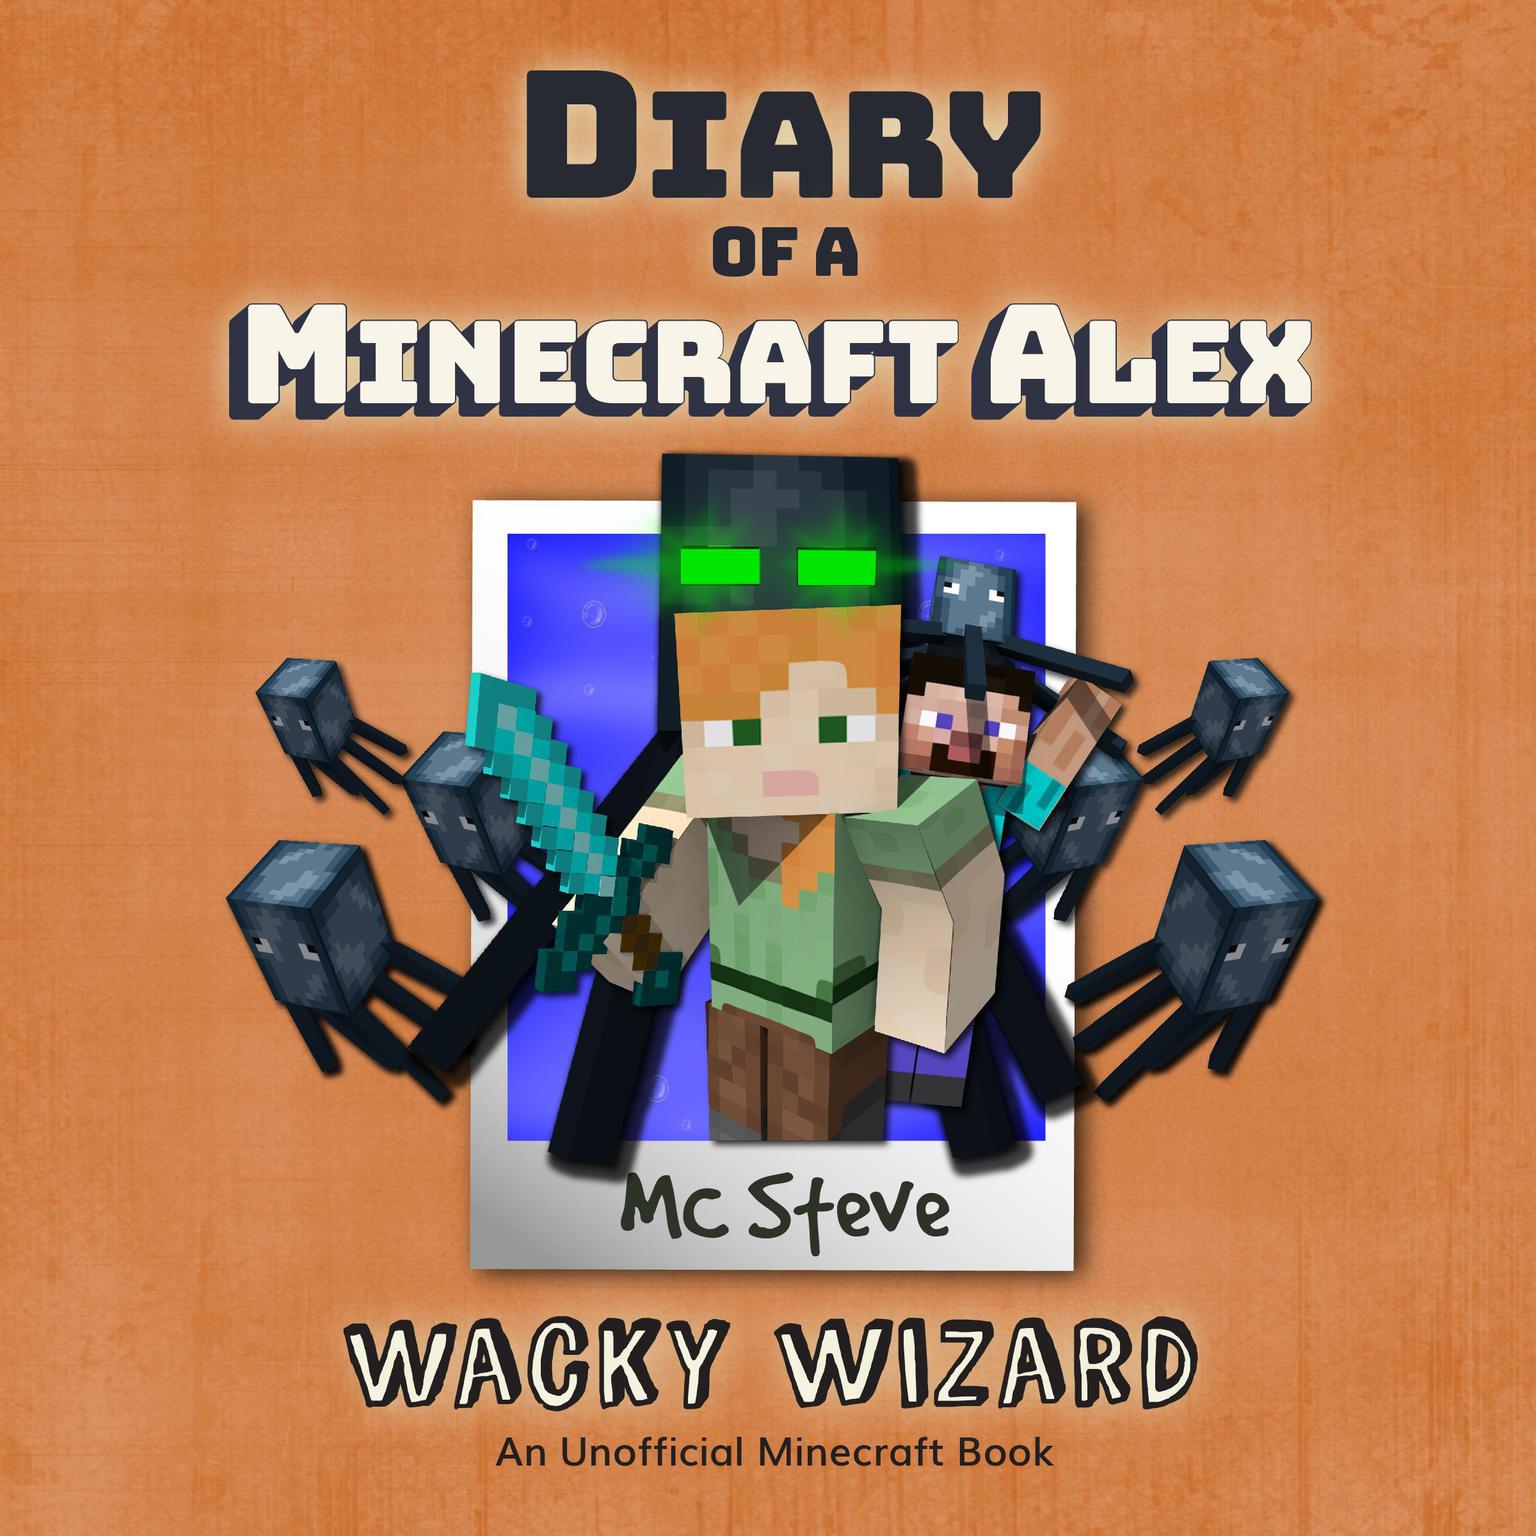 Diary of a Minecraft Alex Book 4: Wacky Wizard (An Unofficial Minecraft Diary Book) Audiobook, by MC Steve